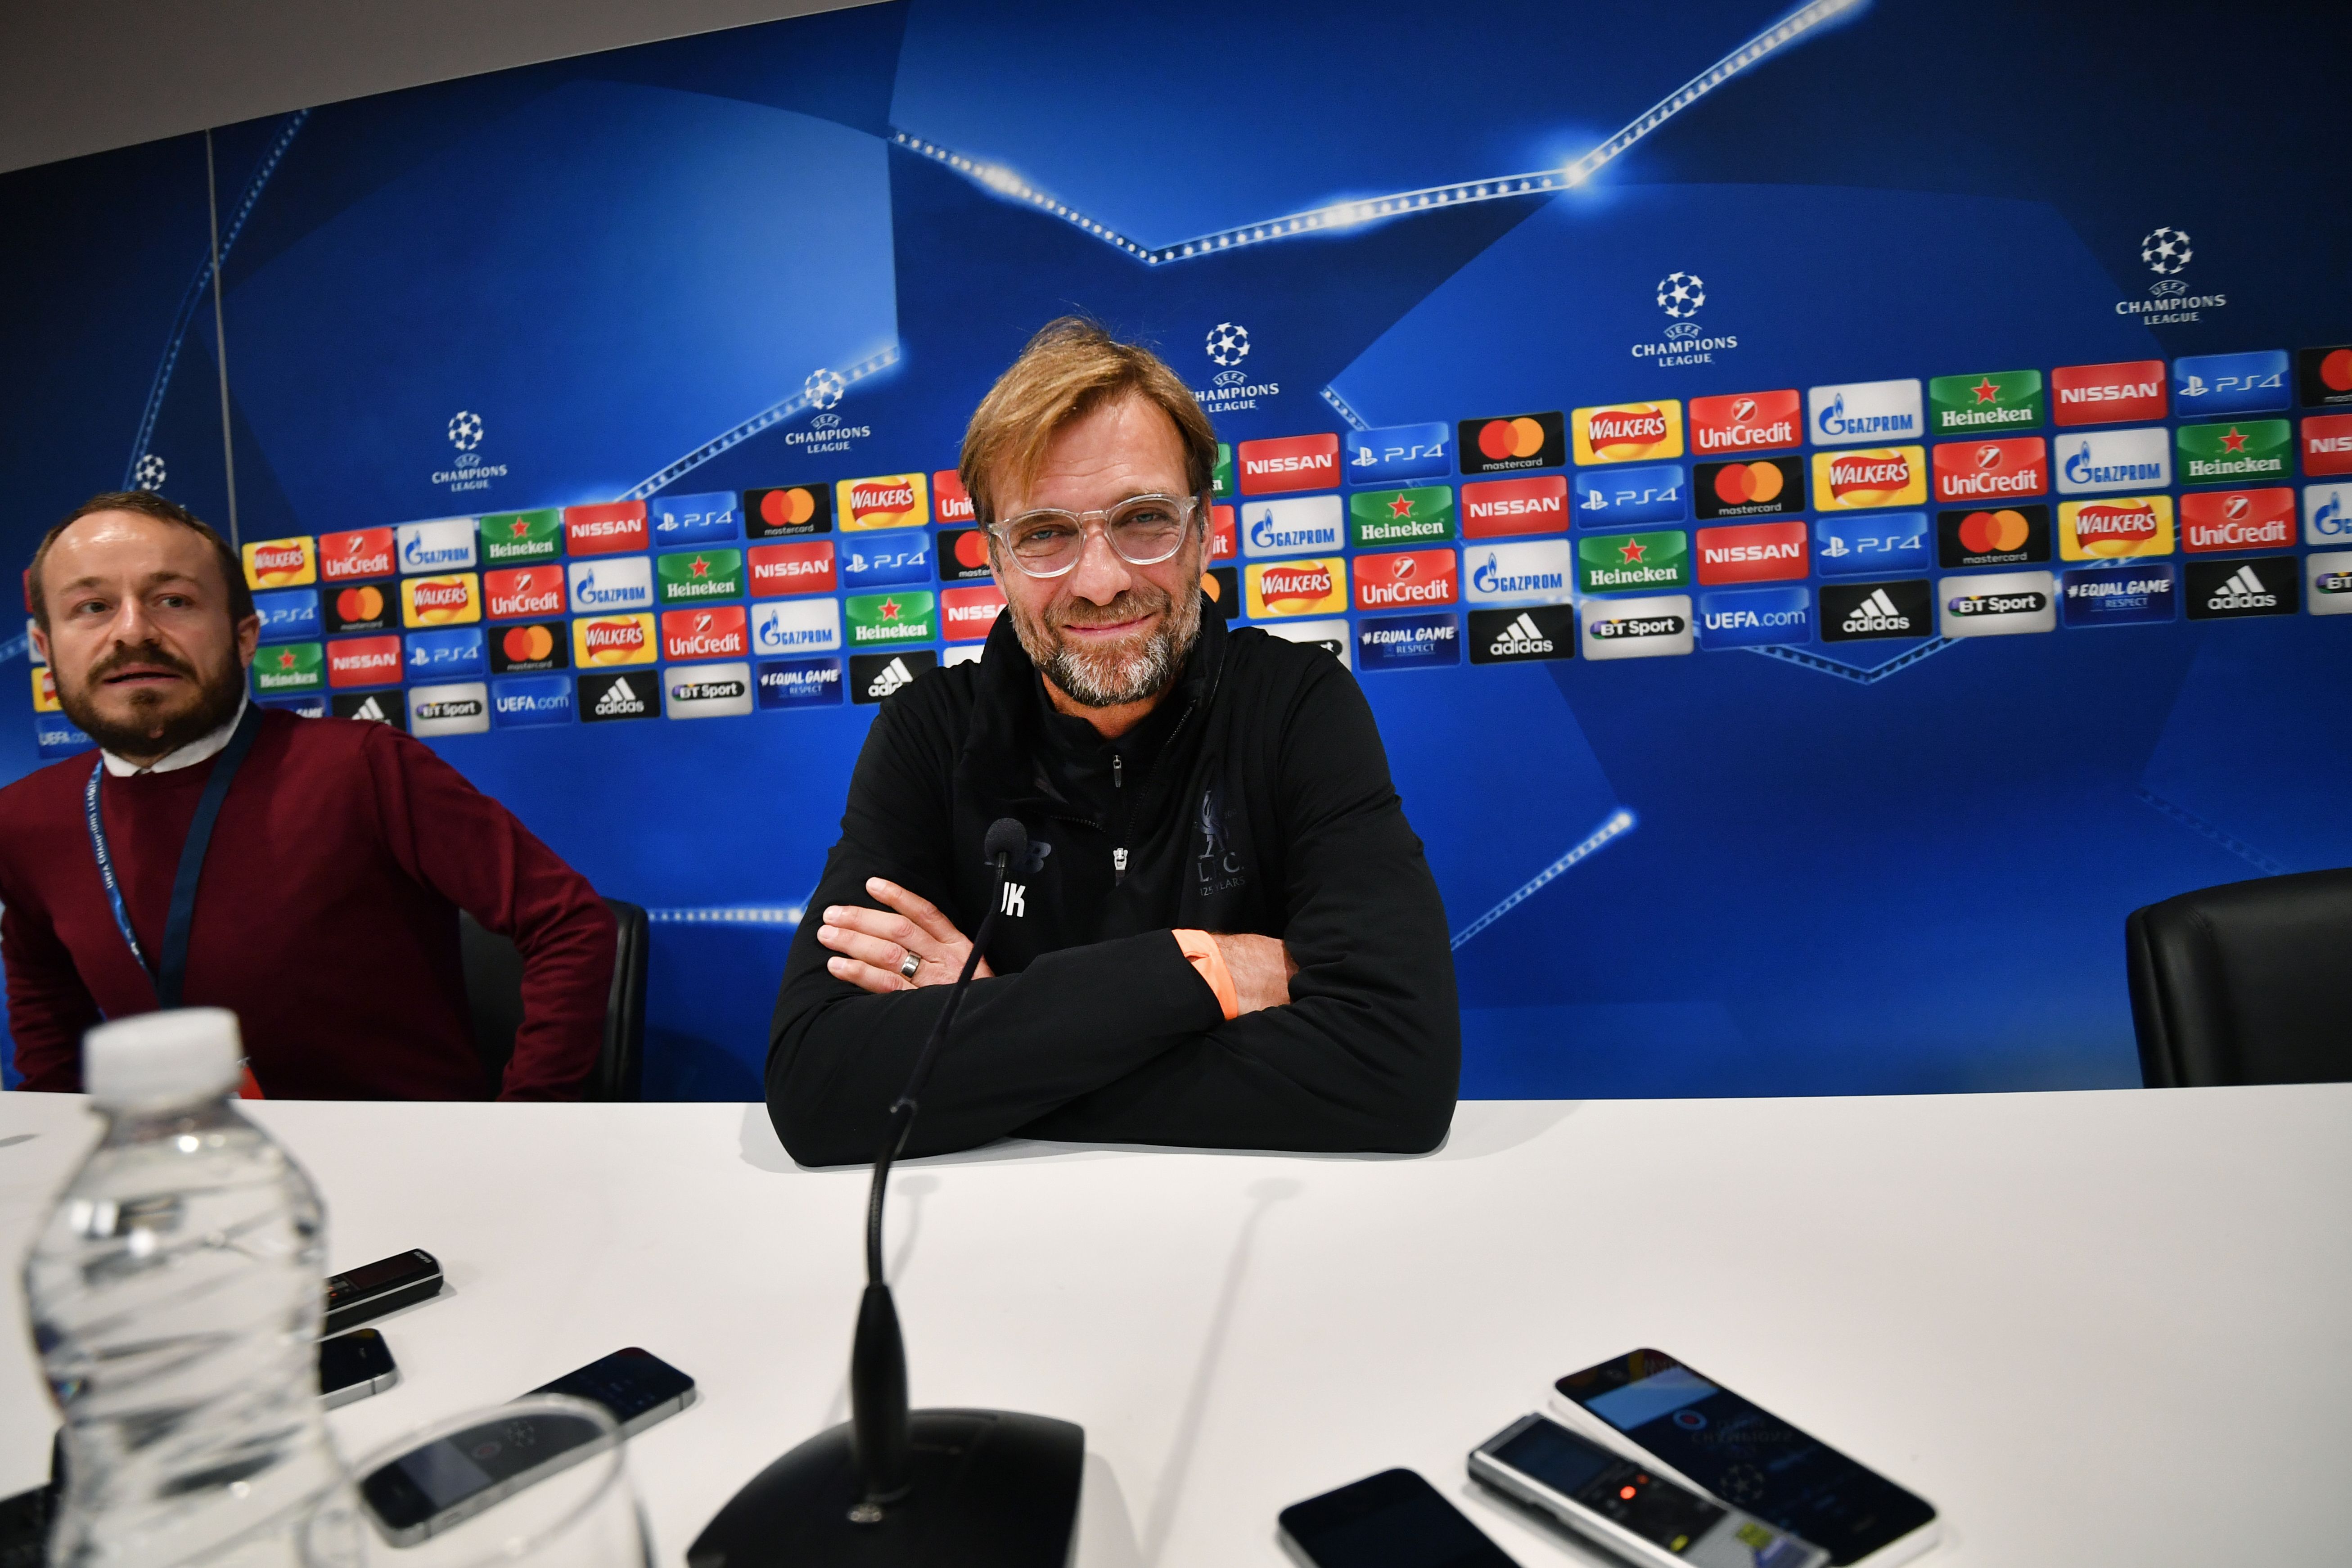 Liverpool's German manager Jurgen Klopp smiles as he attends a press conference at Anfield stadium in Liverpool, north west England on October 31, 2017, on the eve of their UEFA Champions League group E football match against NK Maribor. / AFP PHOTO / Anthony Devlin        (Photo credit should read ANTHONY DEVLIN/AFP/Getty Images)